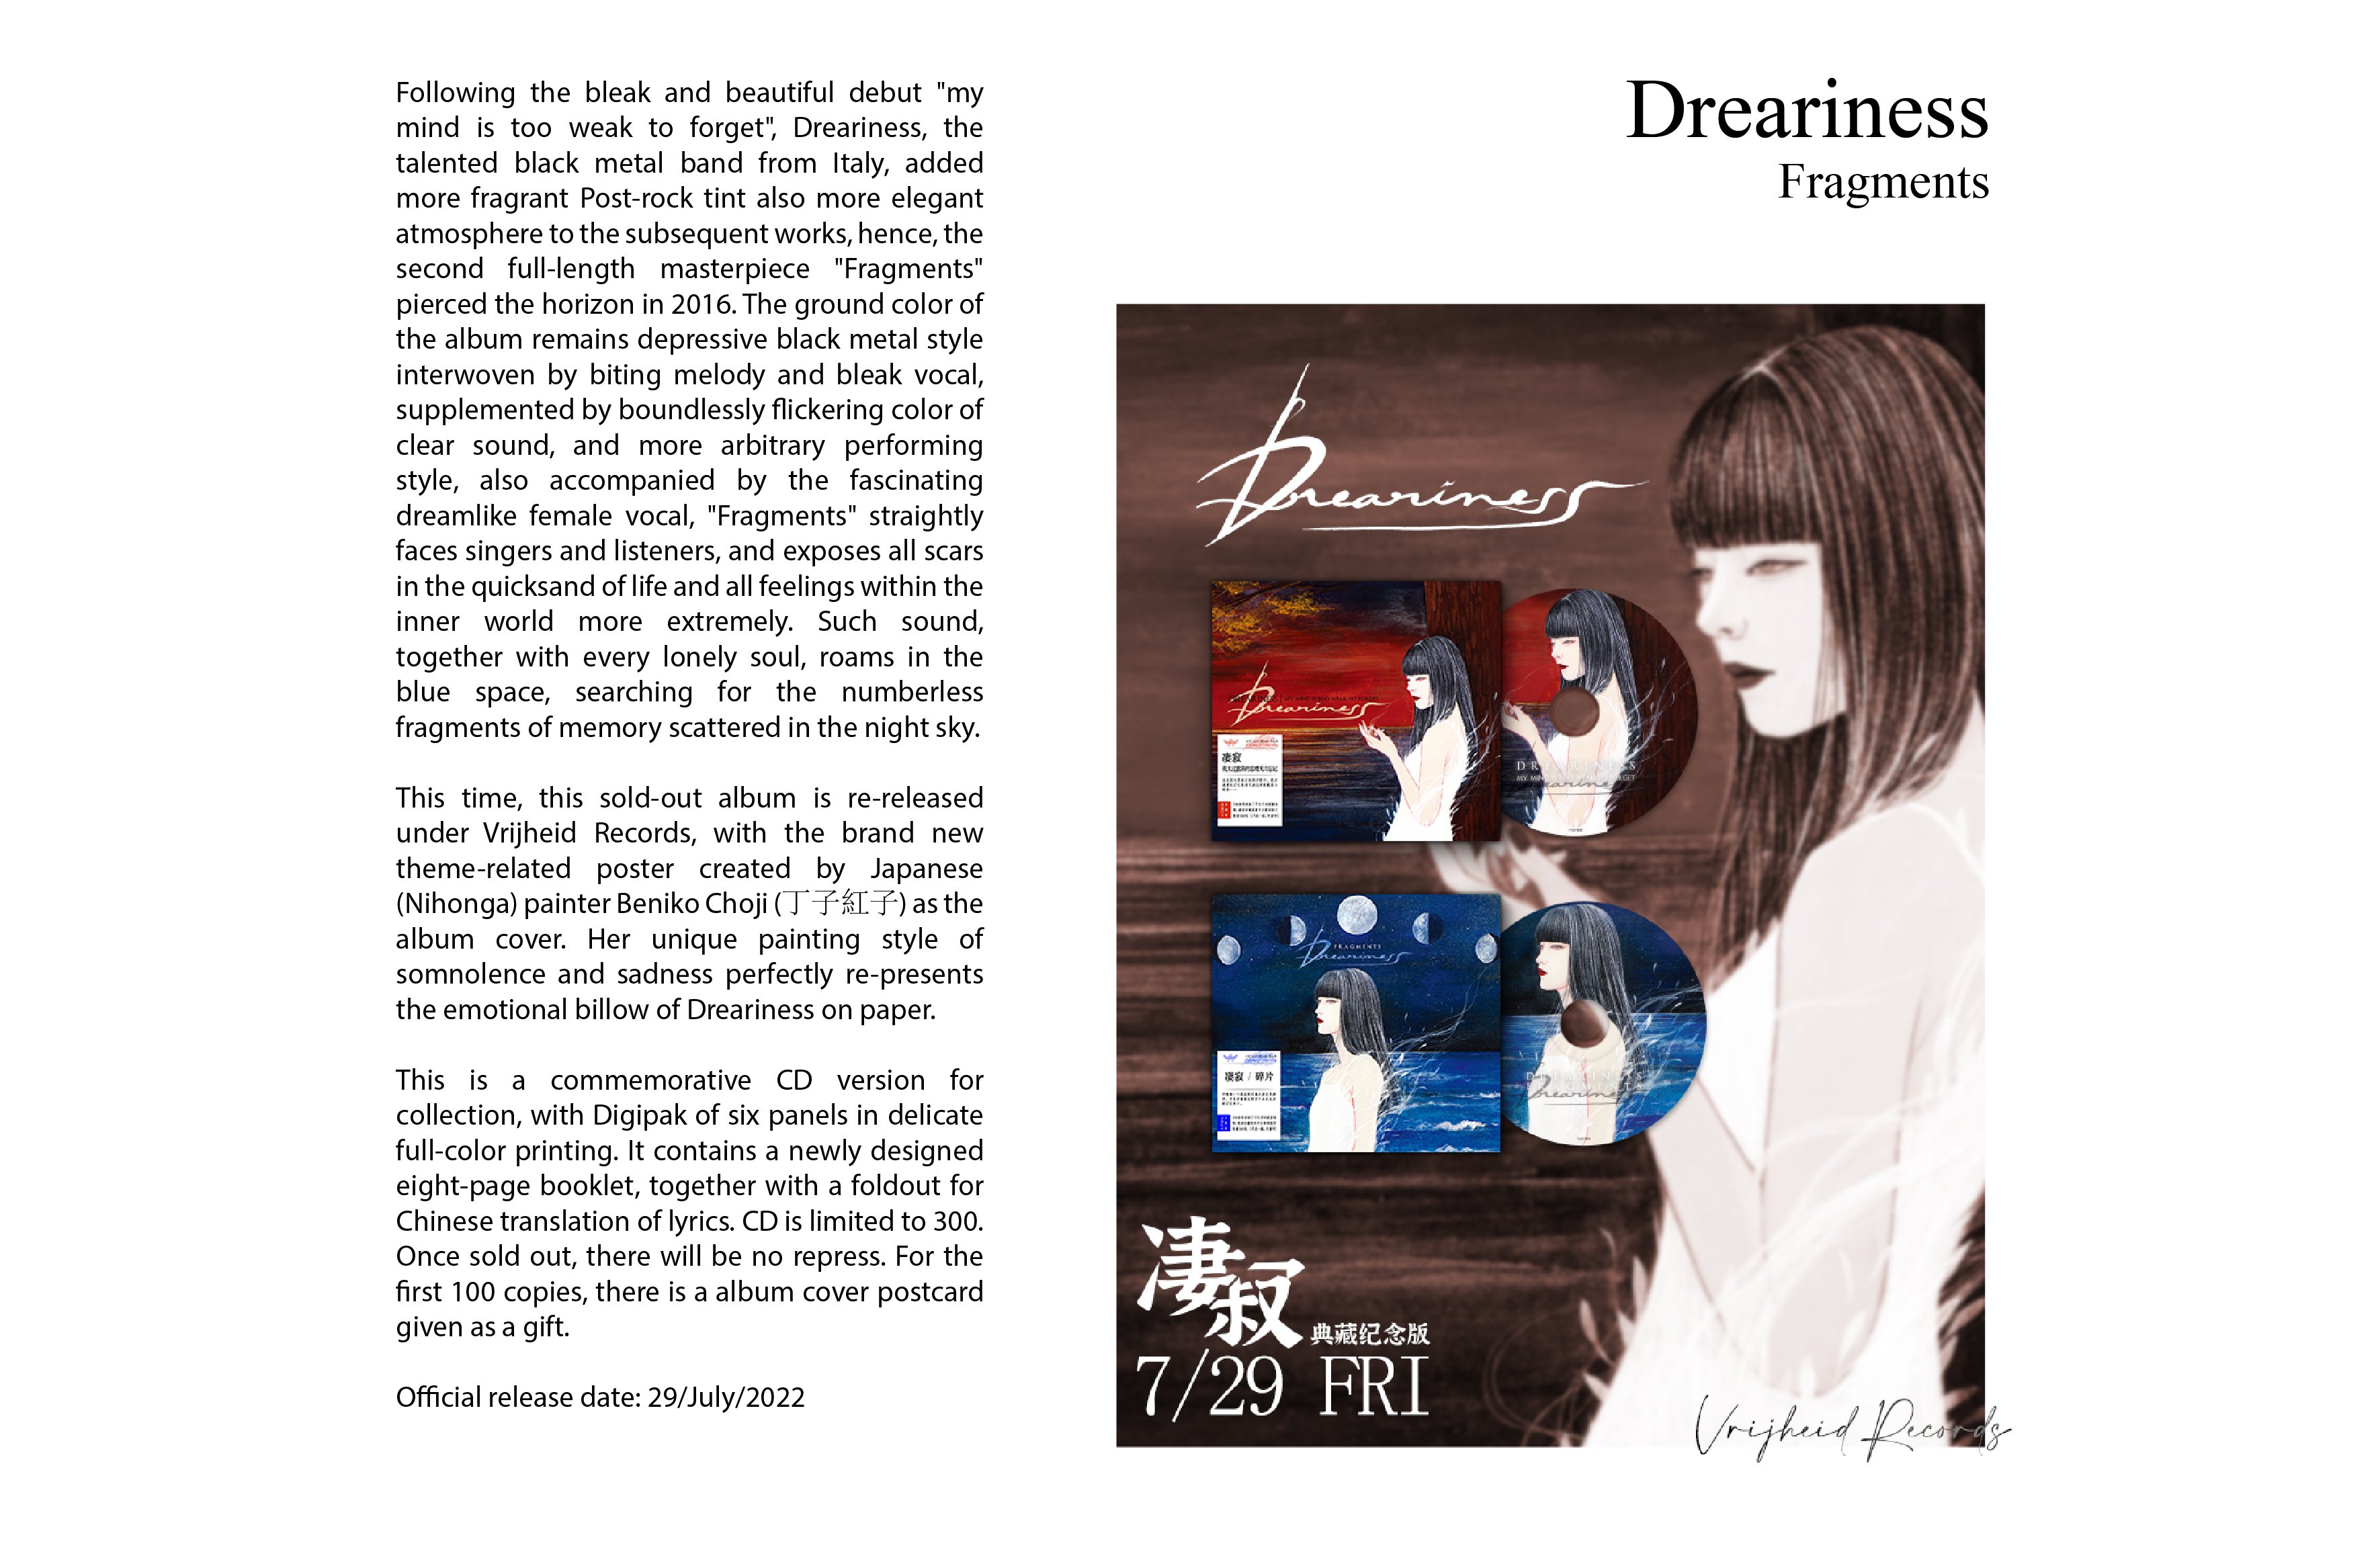 Fragments_CD_release